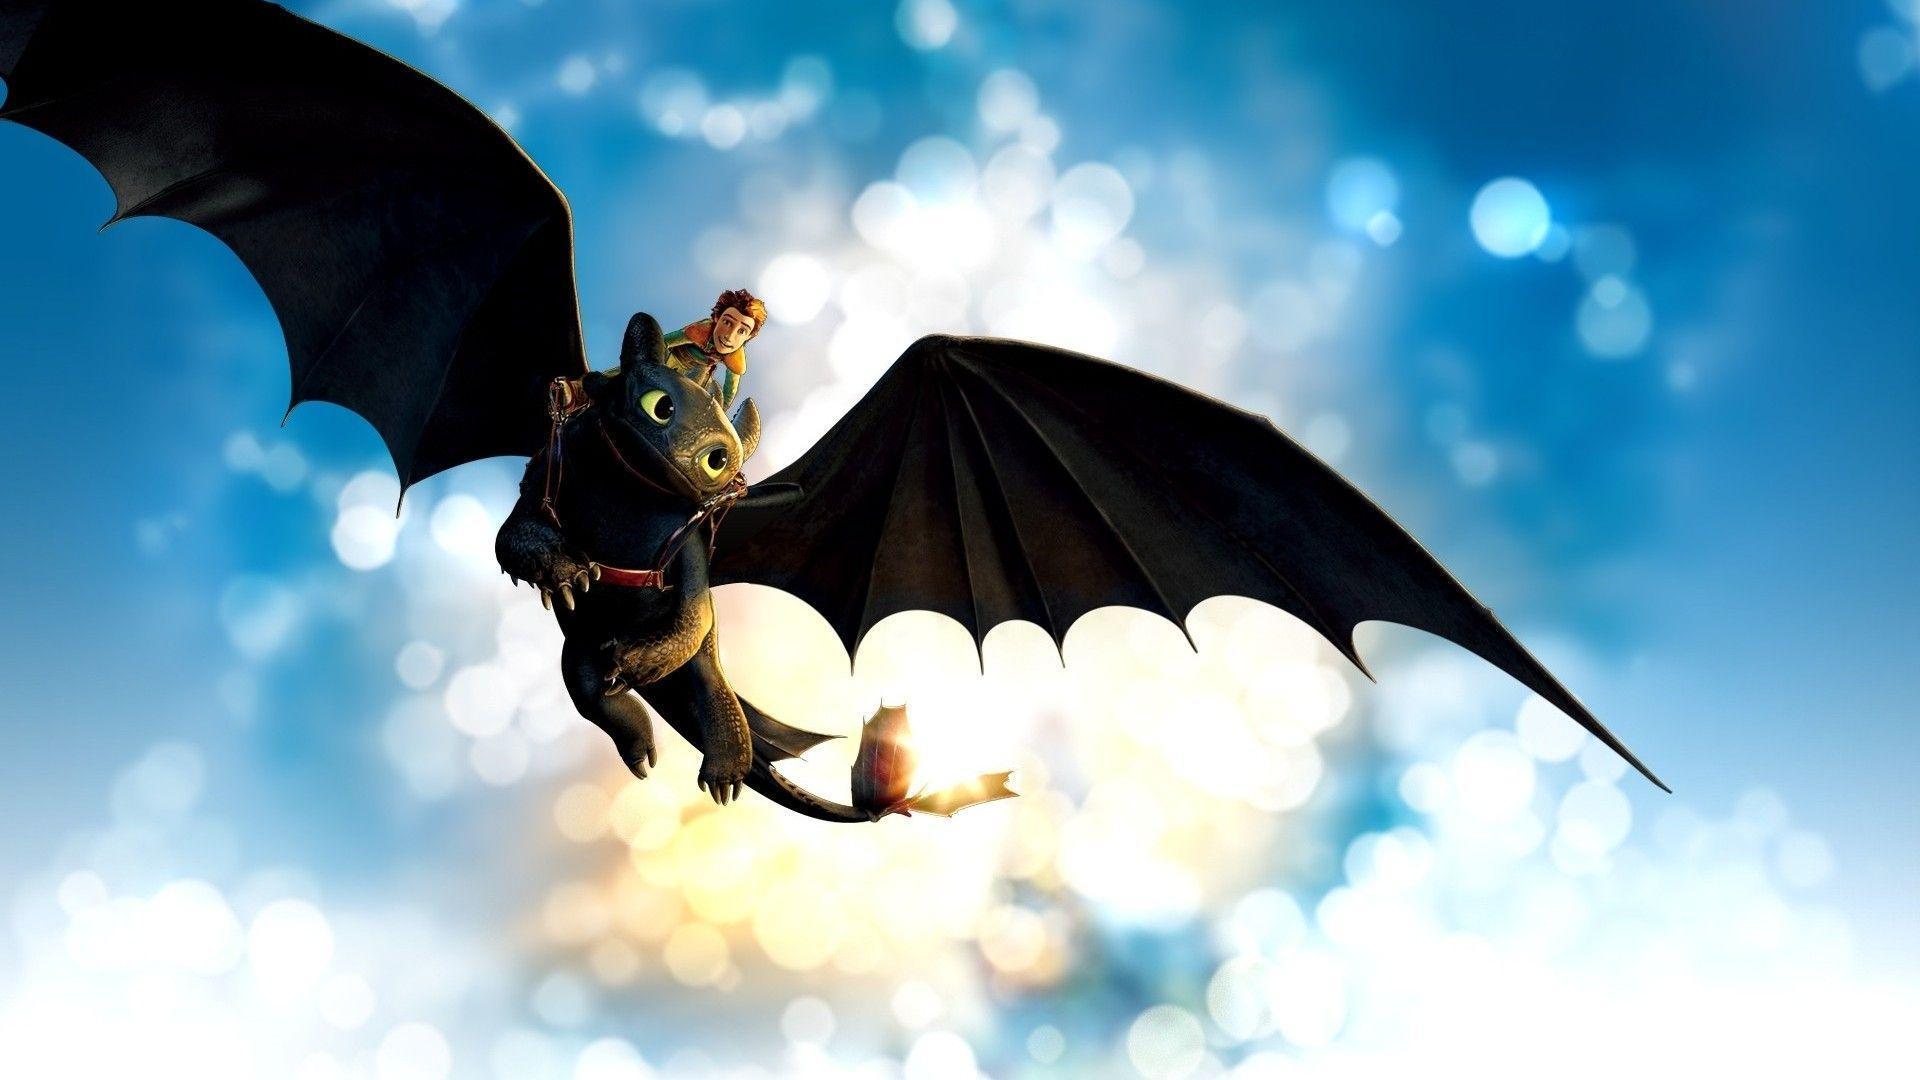 How To Train Your Dragon Wallpaper, How To Train Your Dragon